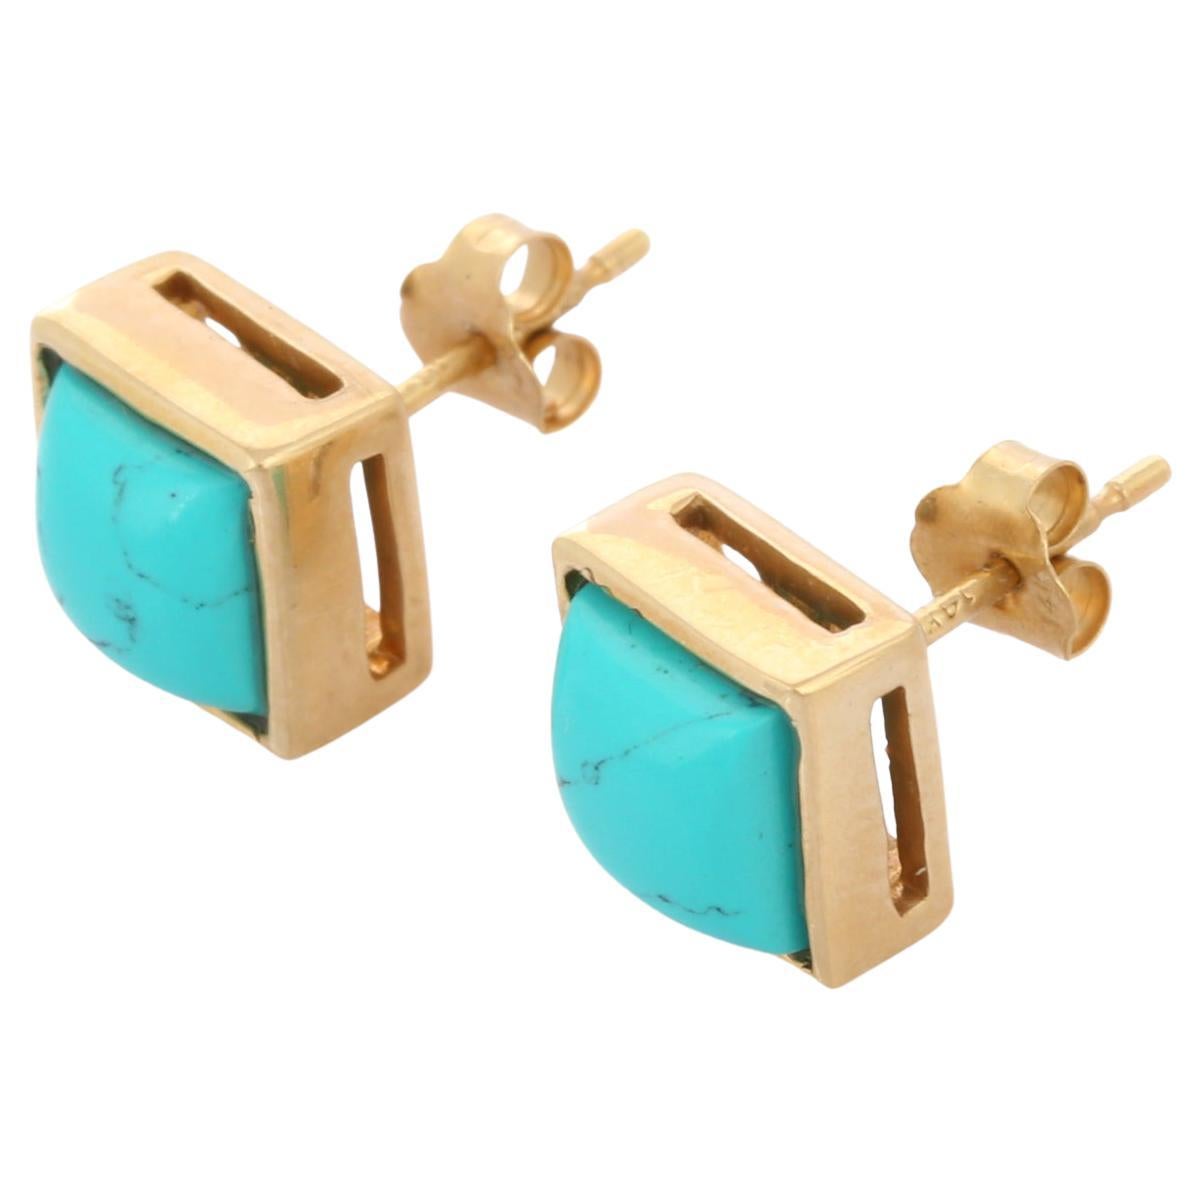 Studs create a subtle beauty while showcasing the colors of the natural precious gemstones.

Square cut turquoise push back studs in 14K gold. Embrace your look with these stunning pair of earrings suitable for any occasion to complete your